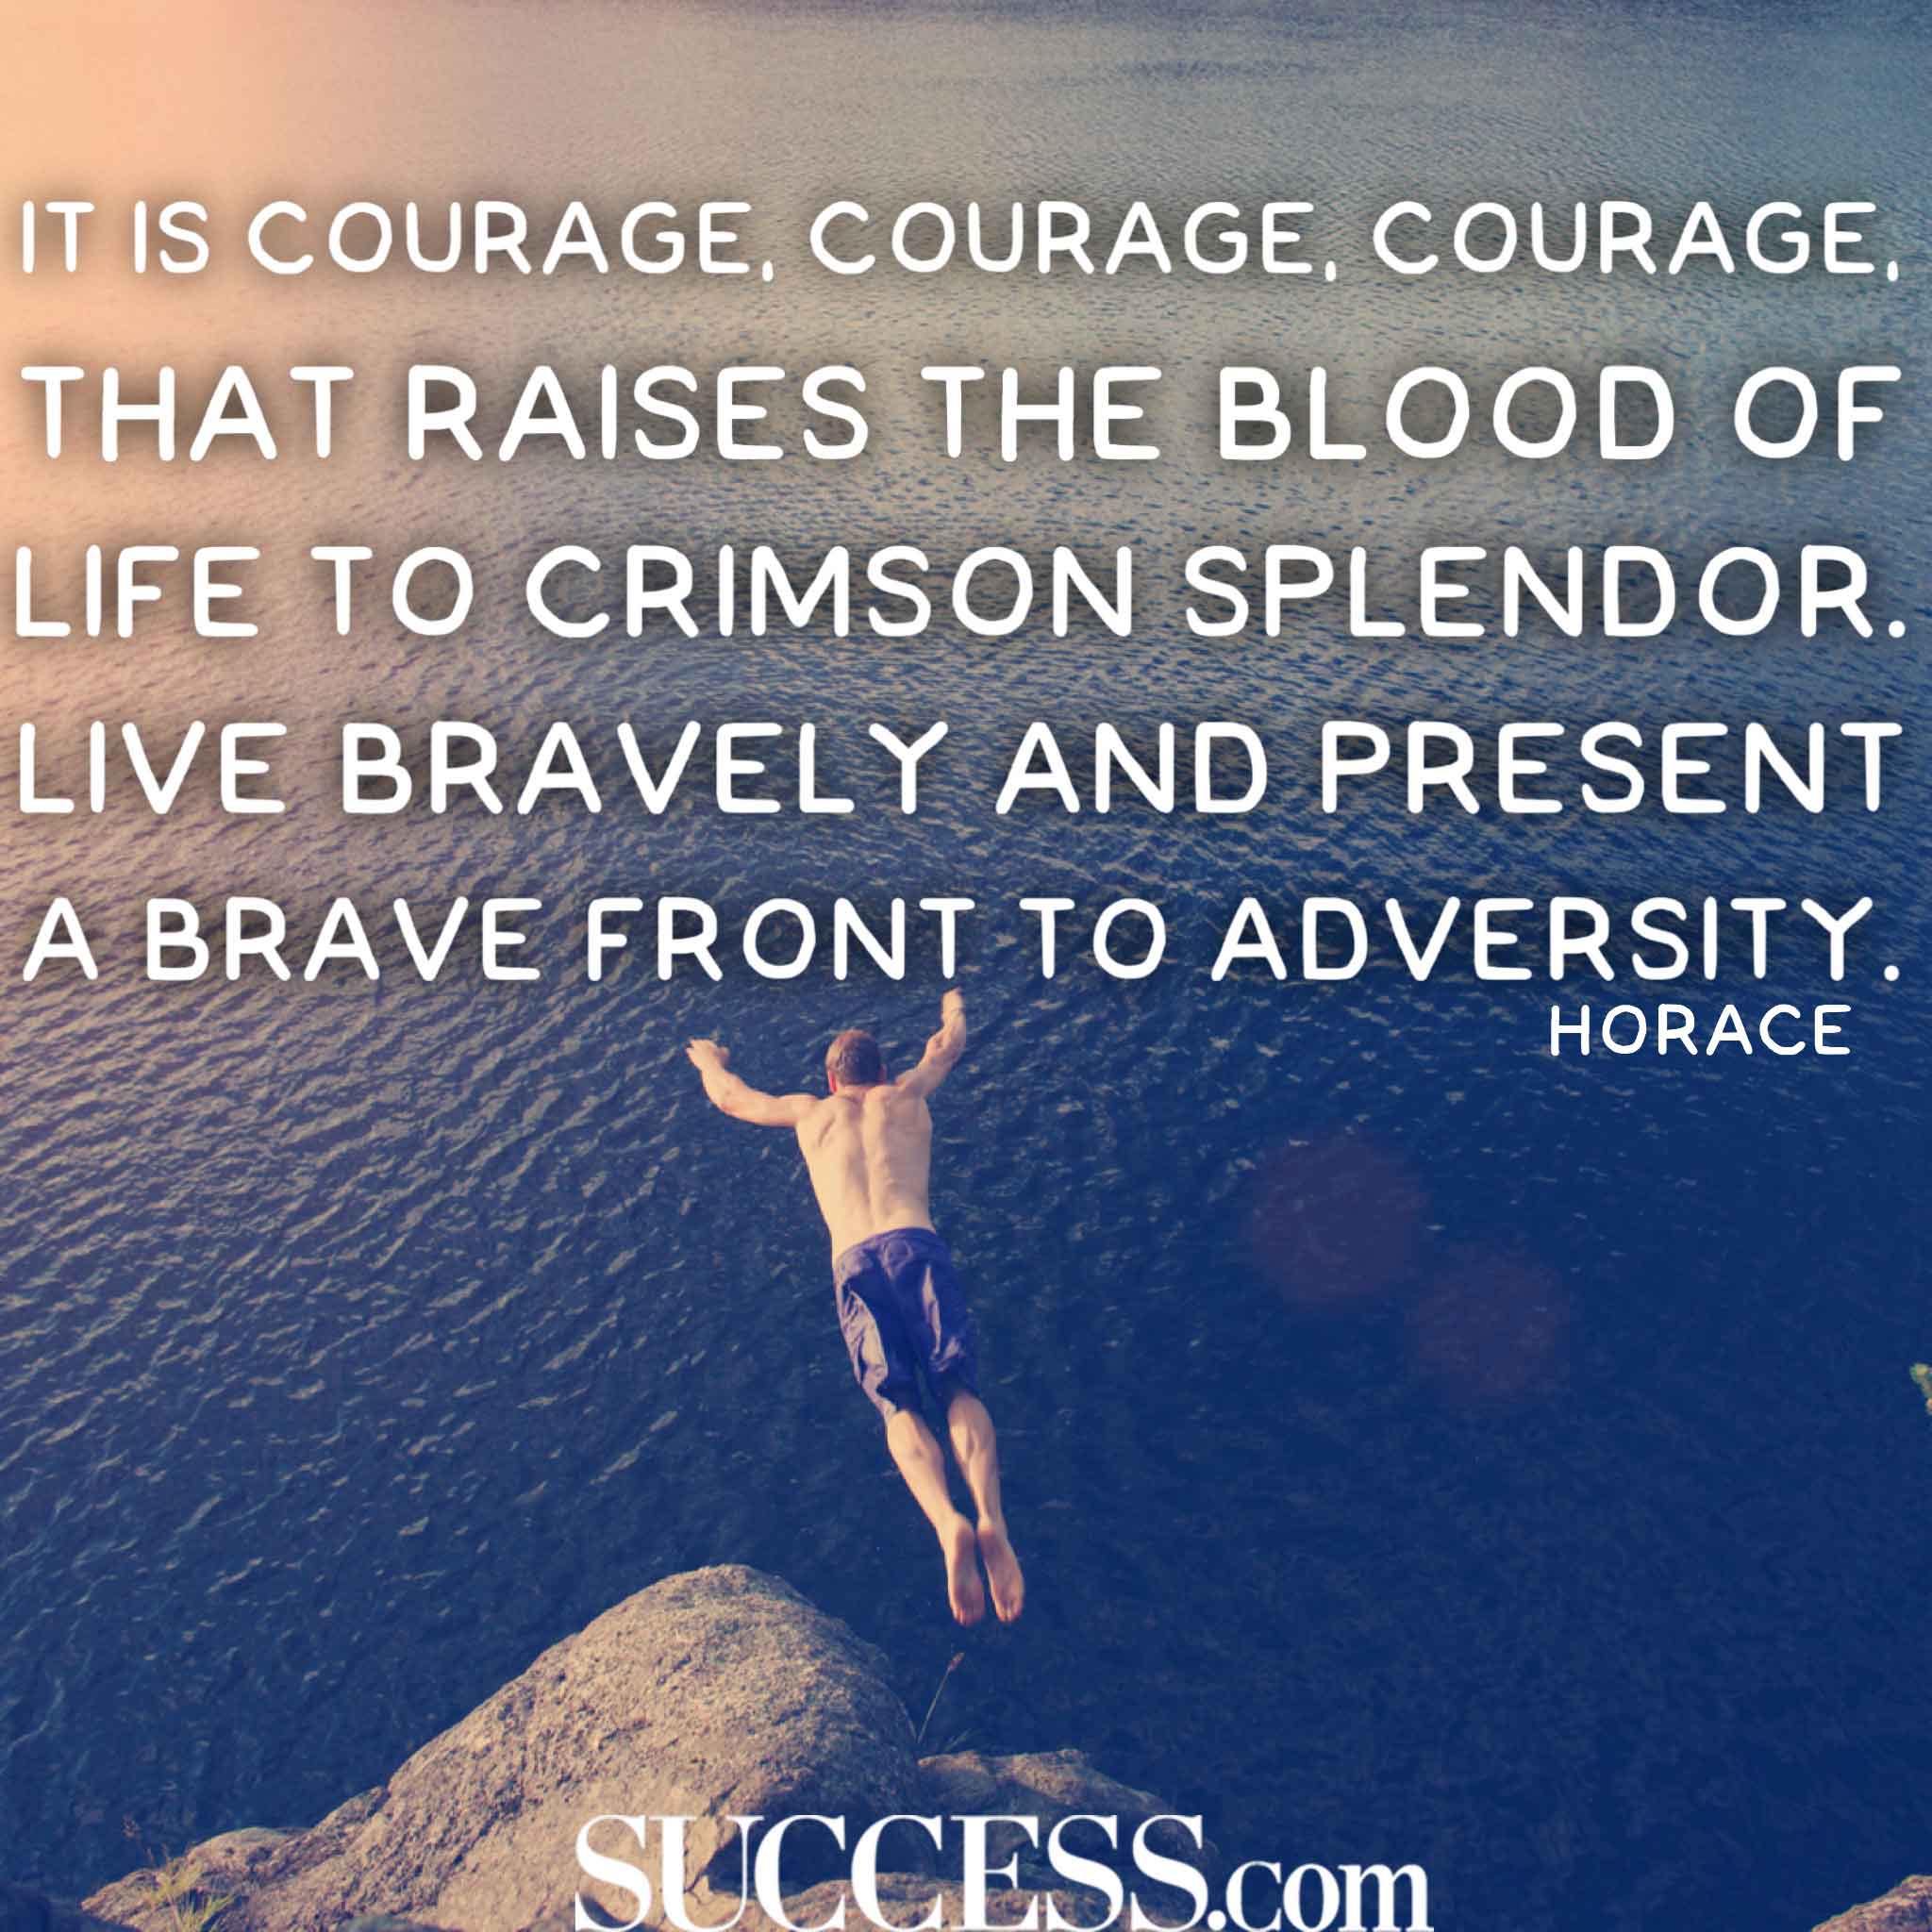 It is courage, courage, courage, that raises the blood of life to crimson splendor. Live bravely and present a brave front to adversity. Horace